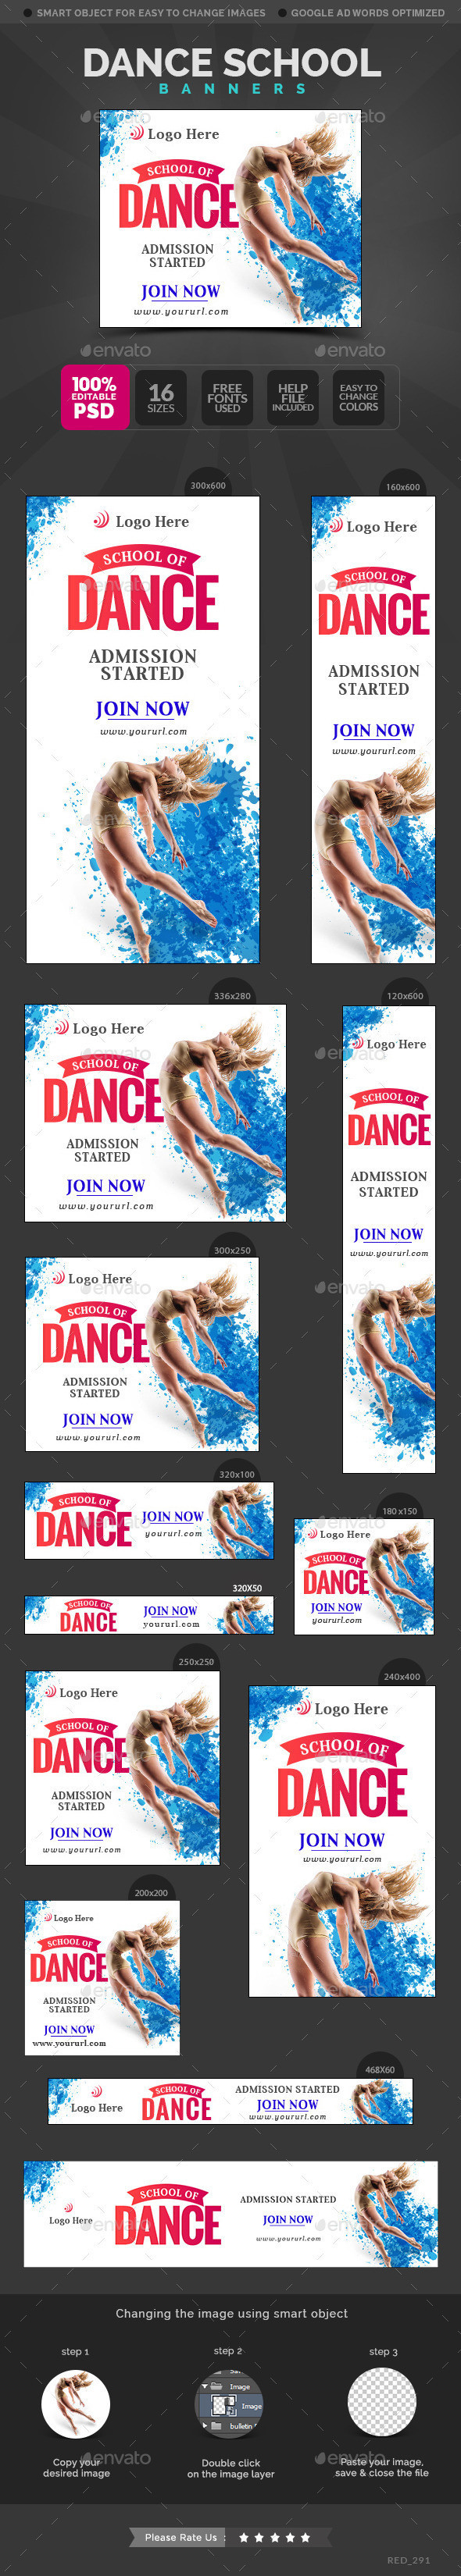 Red 291 dance school banner preview